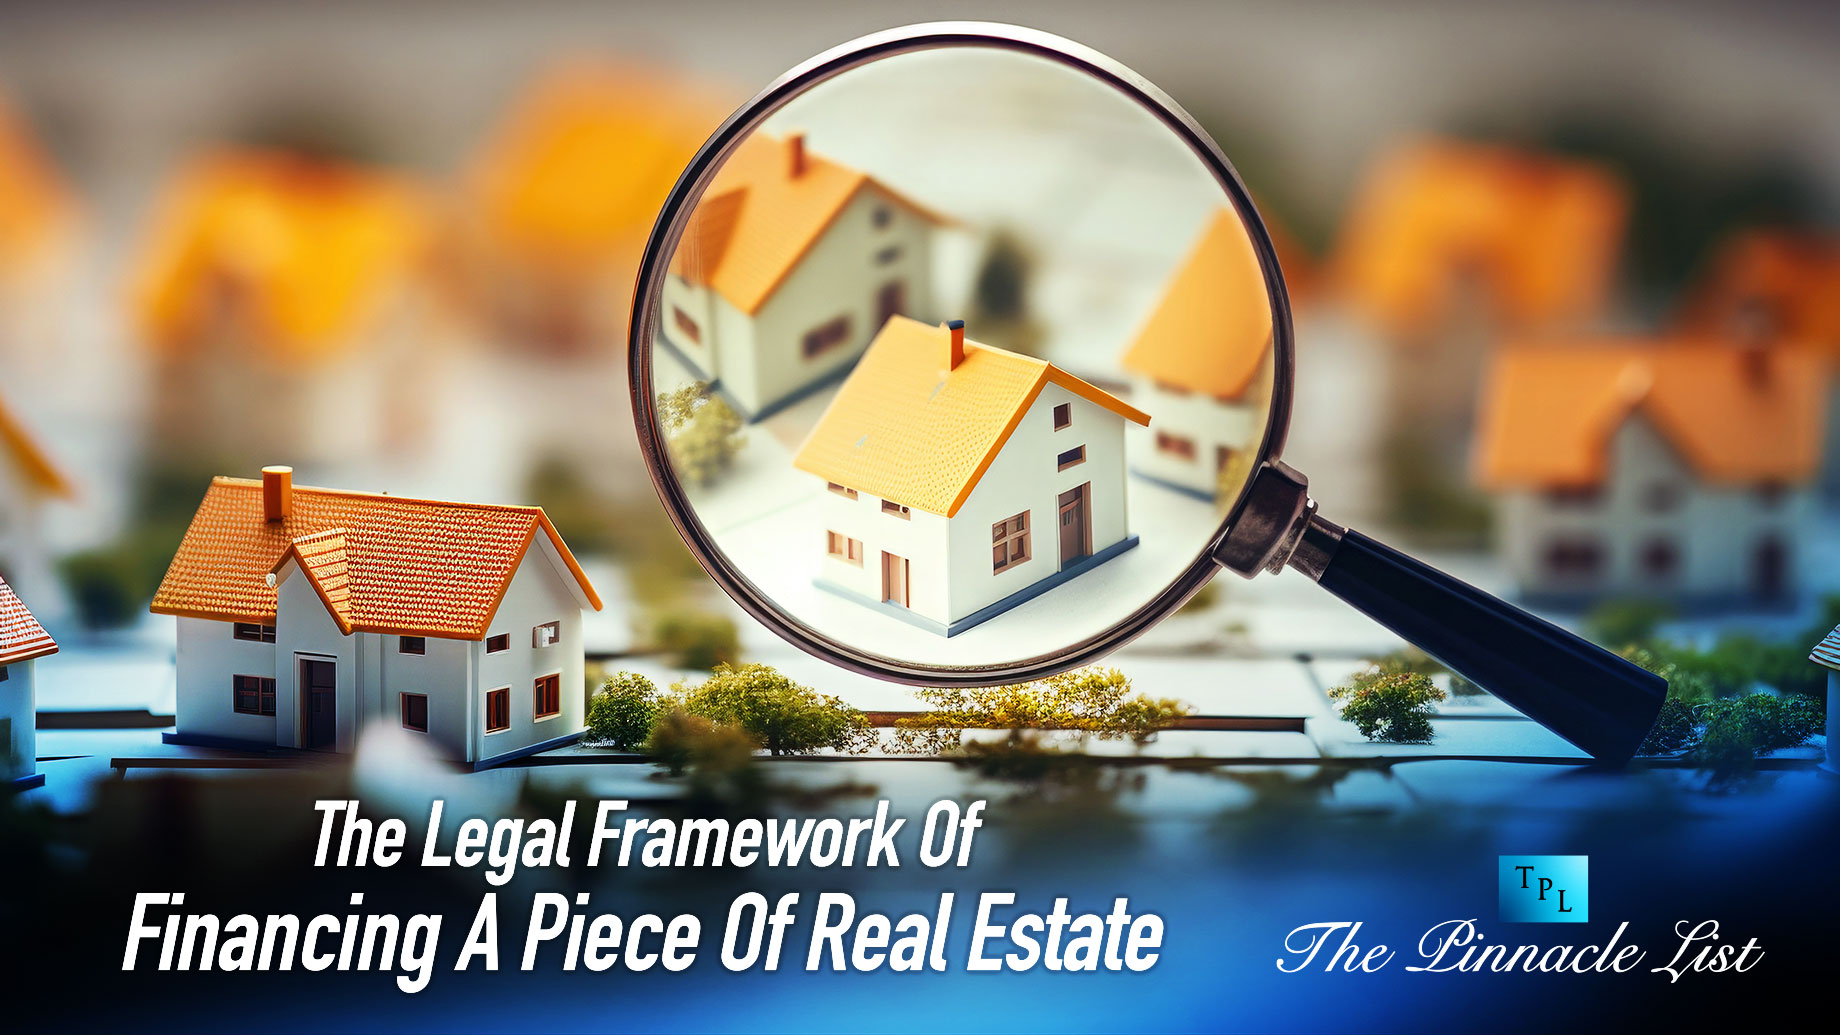 The Legal Framework Of Financing A Piece Of Real Estate